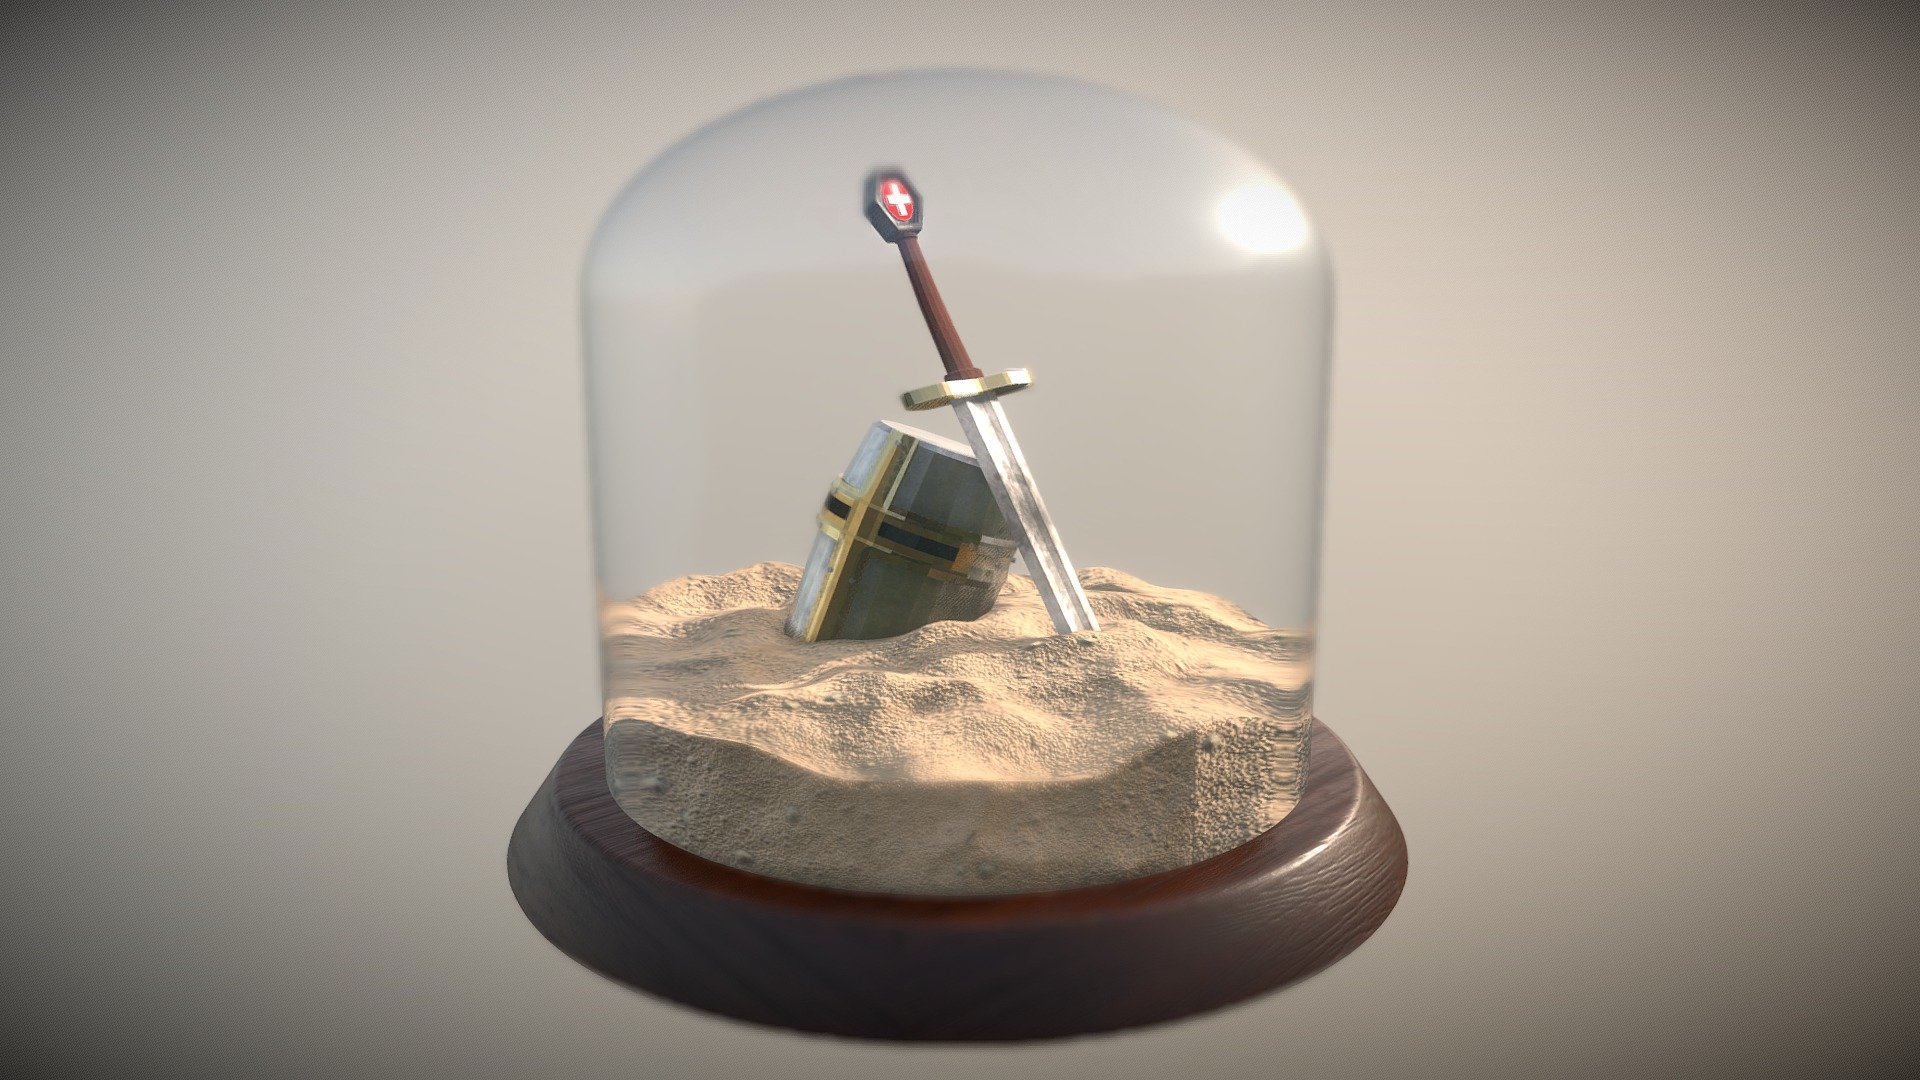 An old templar crusader's helmet and sword semi buried in sand and encased on a glass dome case on a wooden cylindrical surface.

Feels like an oddity suvenir for museums.

Texture size - 2k

I wish I could make more polygons and larger texture sizes but my PC is a bit too weak to keep up in today's standard performances 3d model